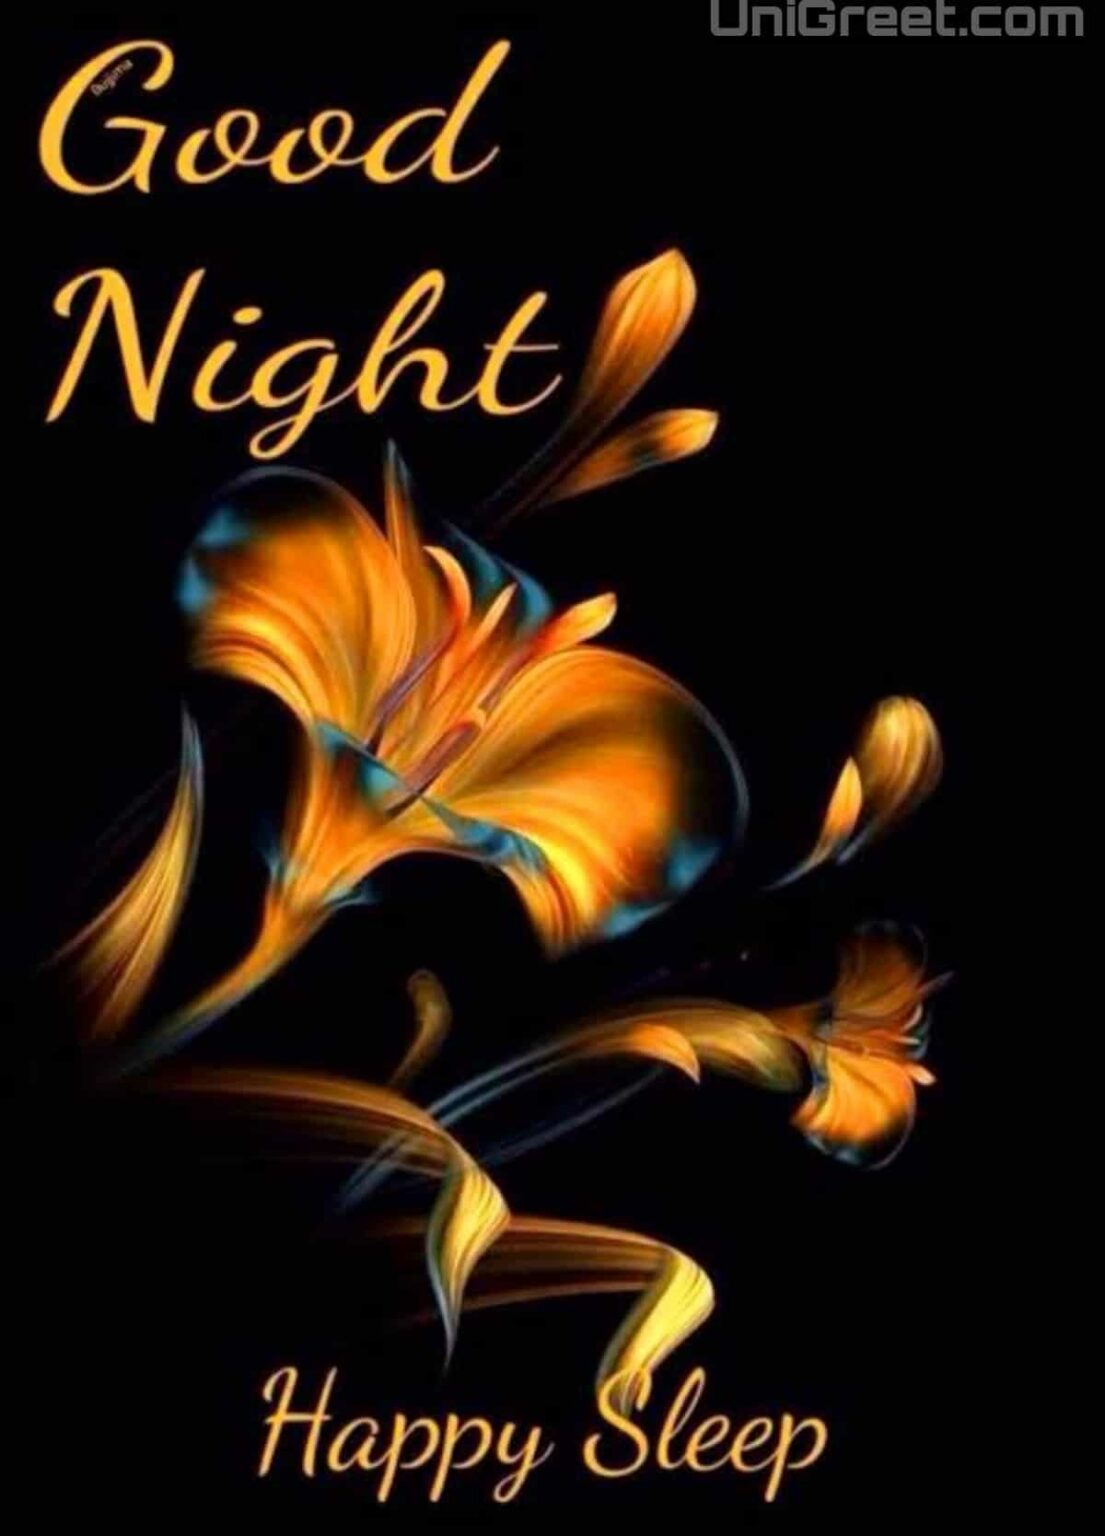 Latest Good Night Images Download For Whatsapp | New Special Good Night ...